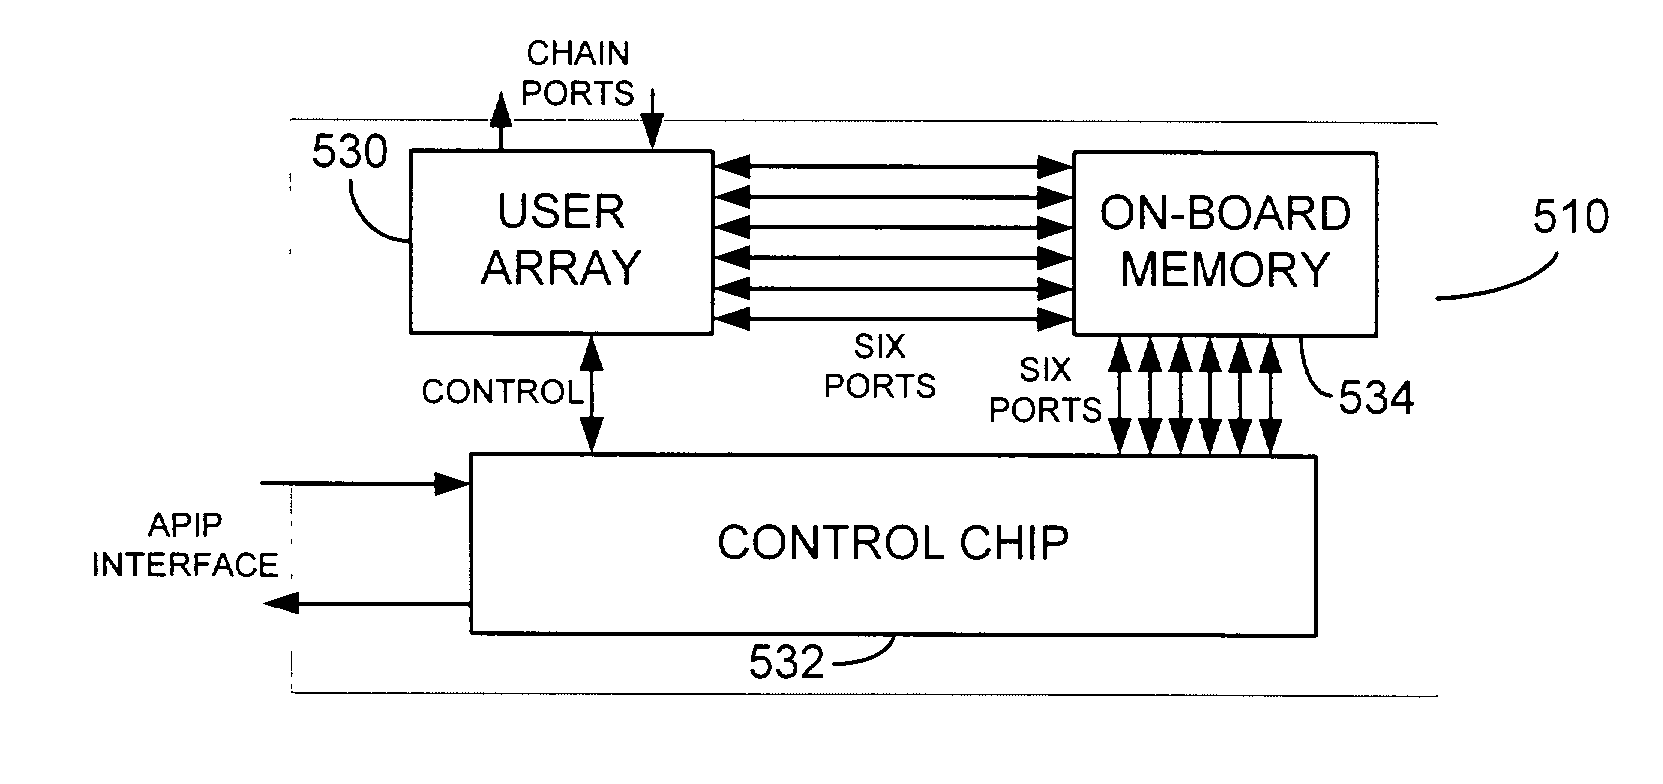 Computer system architecture and memory controller for close-coupling within a hybrid processing system utilizing an adaptive processor interface port